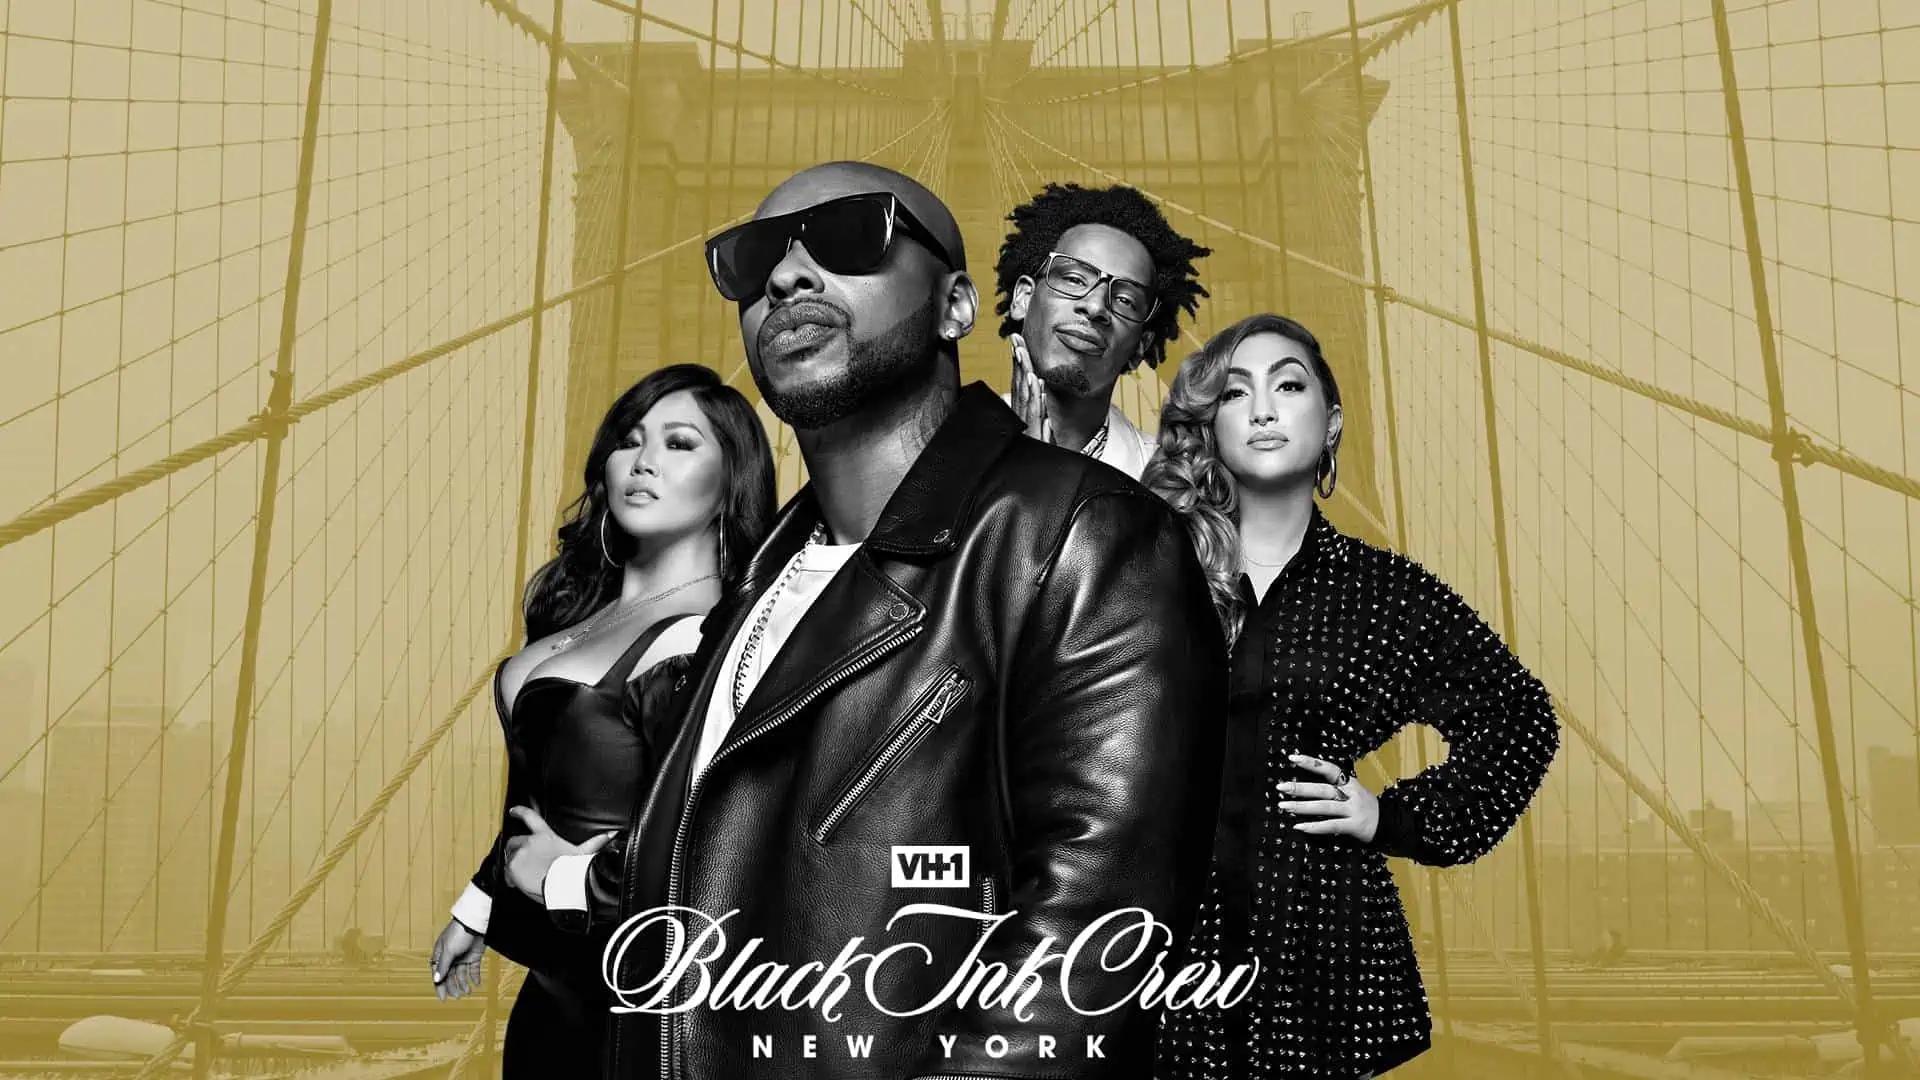 All About the Cast of “Black Ink Crew”